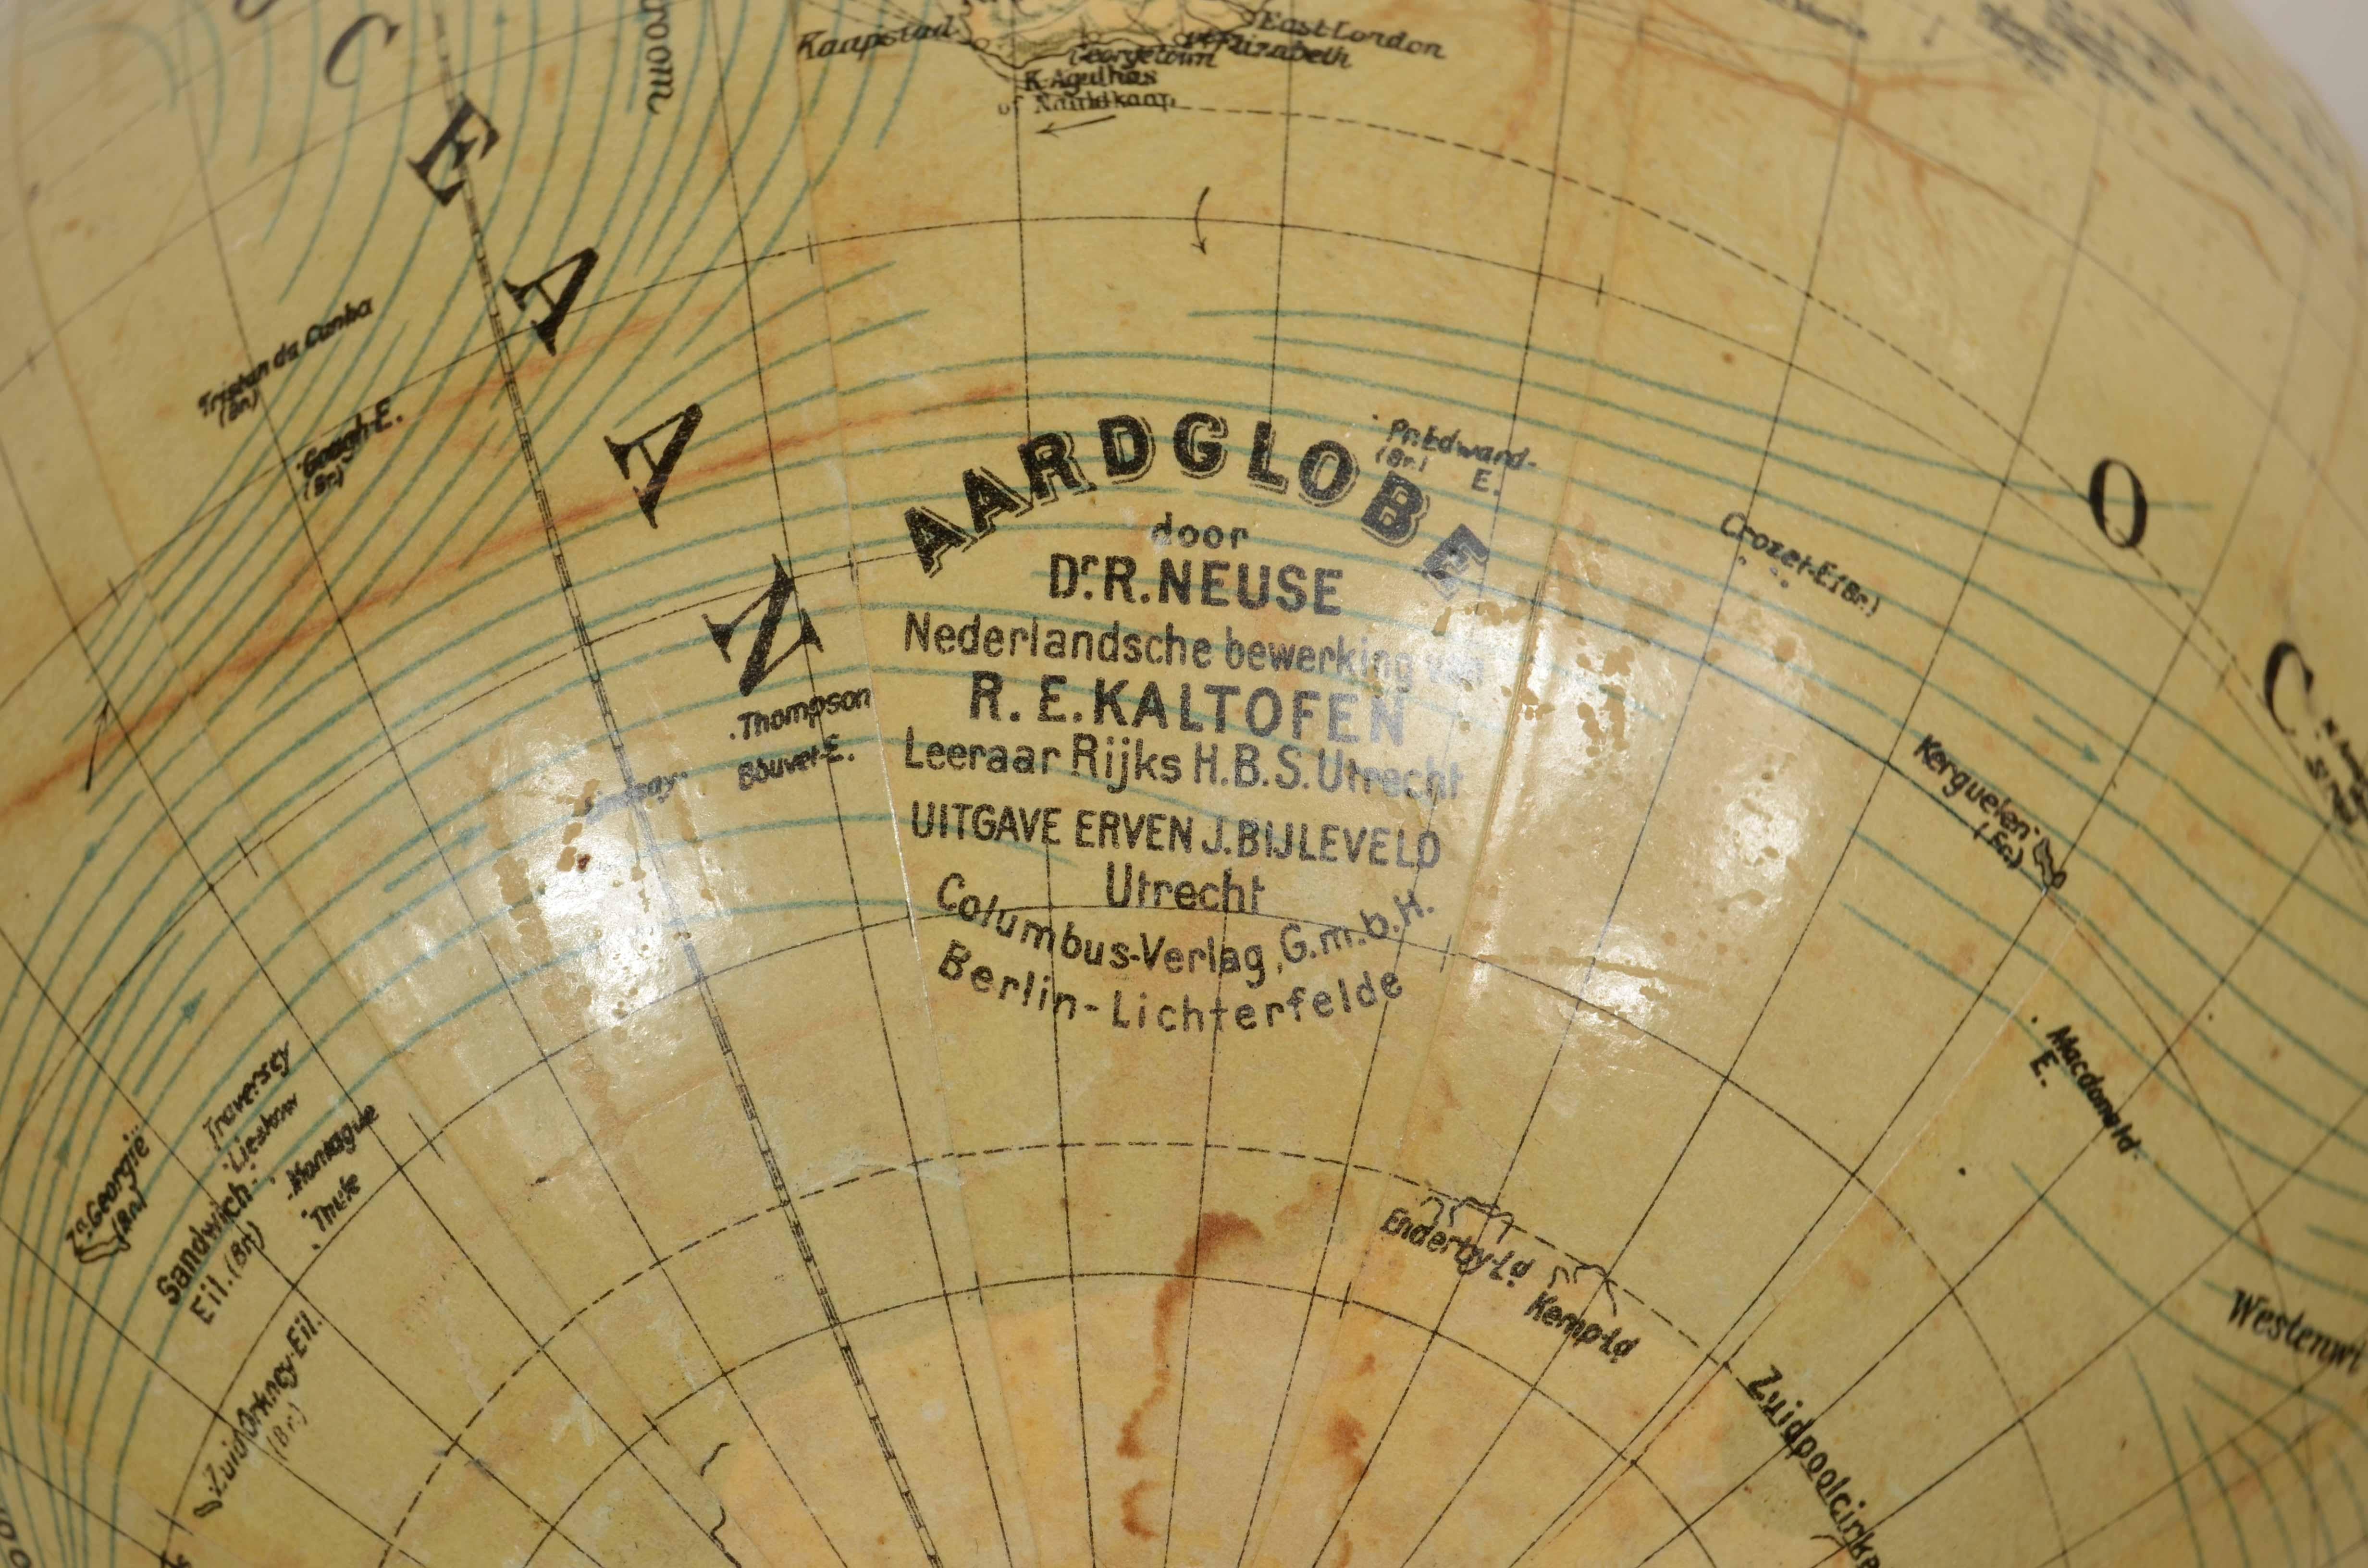 Earth globe published for the Dutch market in the early 20th century by the Columbus publishing house, the cartouche reads: Dr. R. Neuse's Aardglobe. Nederlandsche bewerking van R.E. KALTOFEN Leeraar Rijks H.B.S. Utrecht UITGAVE ERVEN J.  BIJLEVELD.